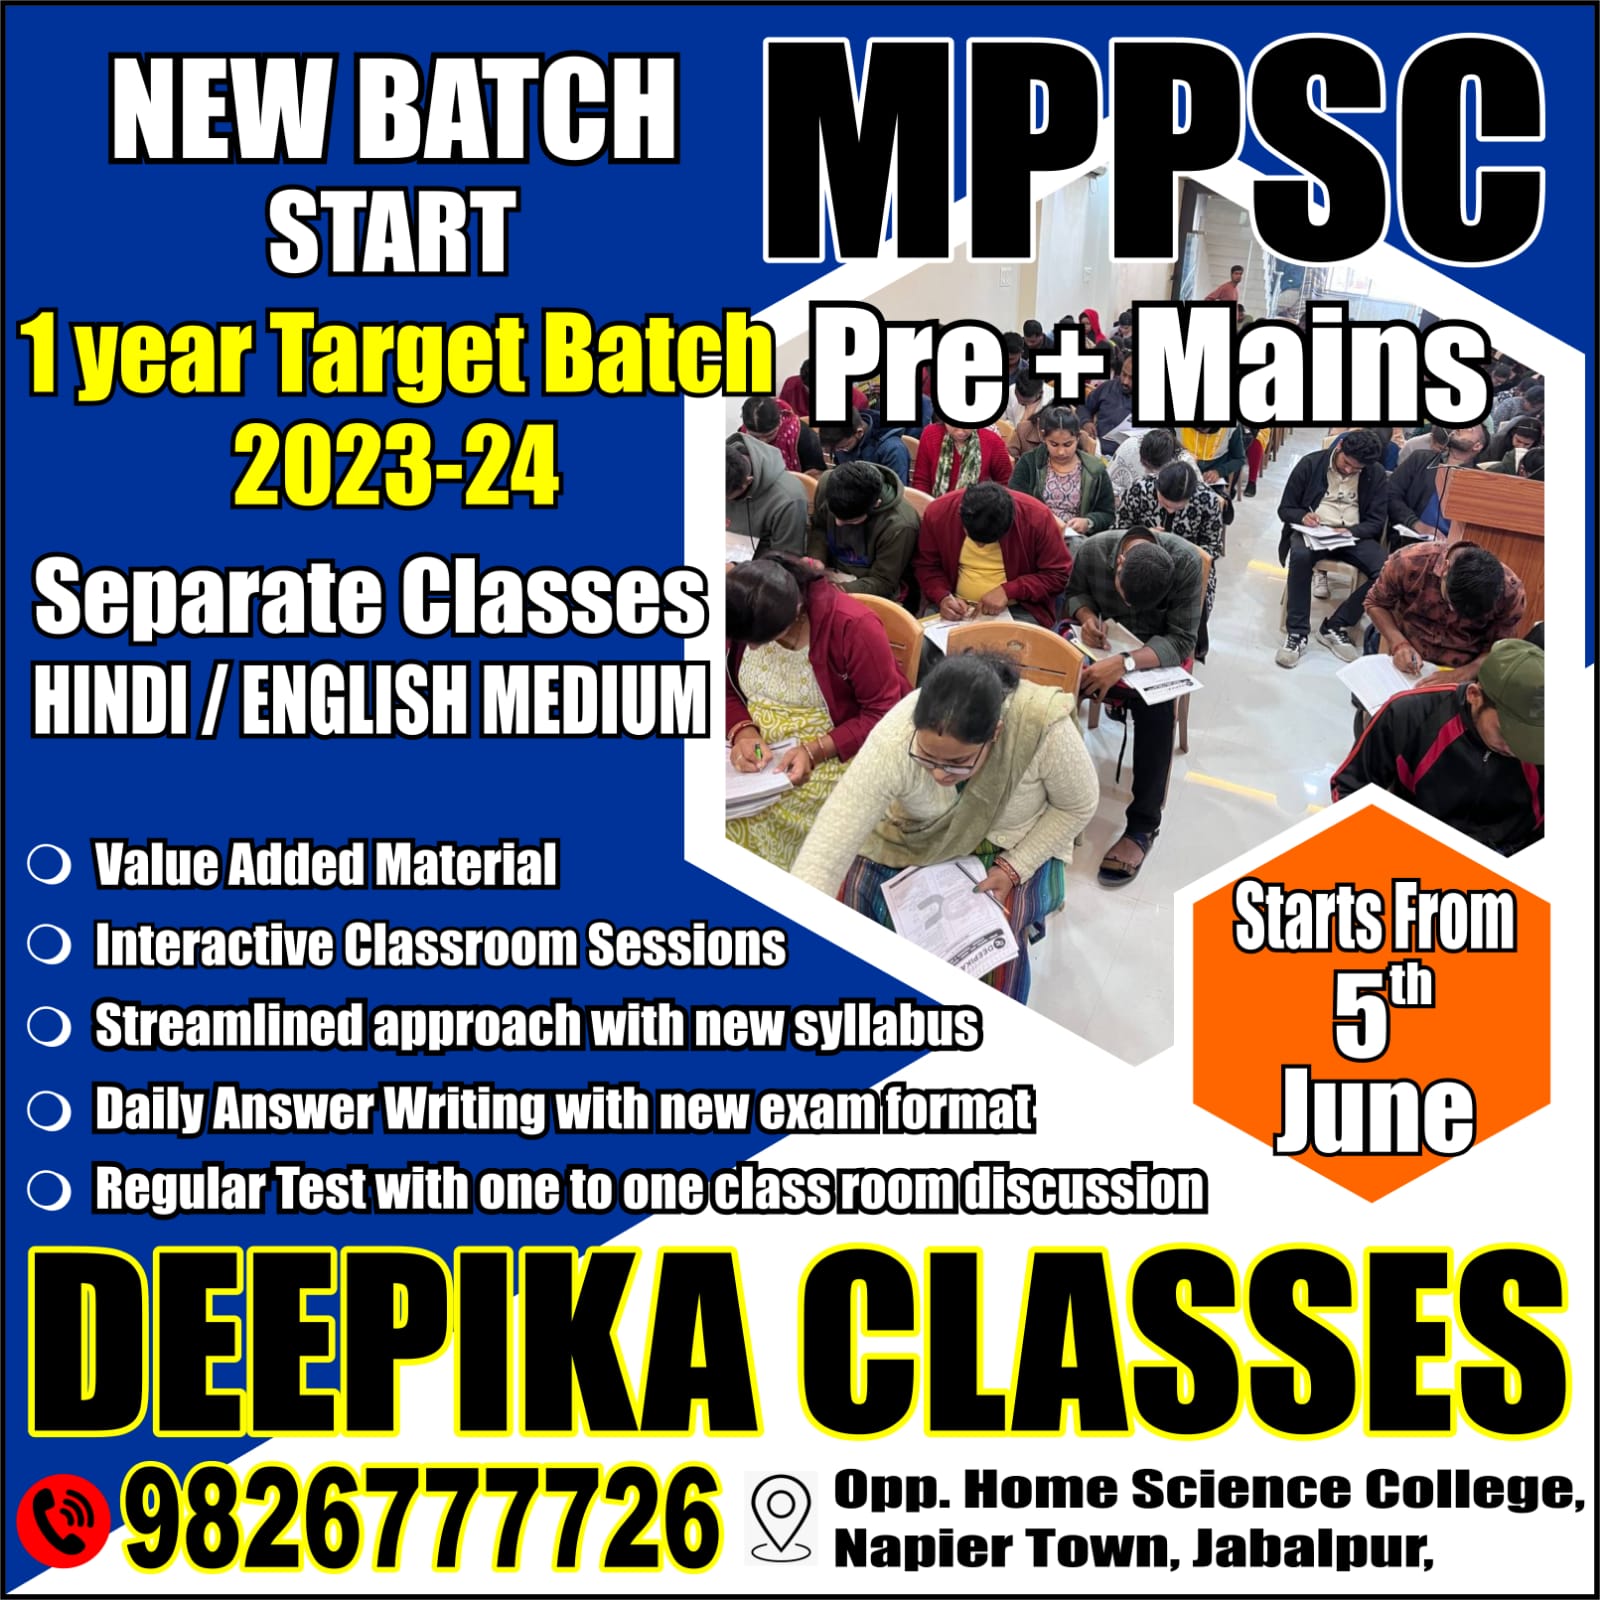 Come and Join us for new batch for Mppsc Classes in Jabalpur | Deepika Classes | Mppsc Classes in Jabalpur, best Mppsc Classes in Jabalpur, Mppsc Coaching in Jabalpur, mppsc coaching institute in Jabalpur, mppsc preparation in jabalpur - GL113172